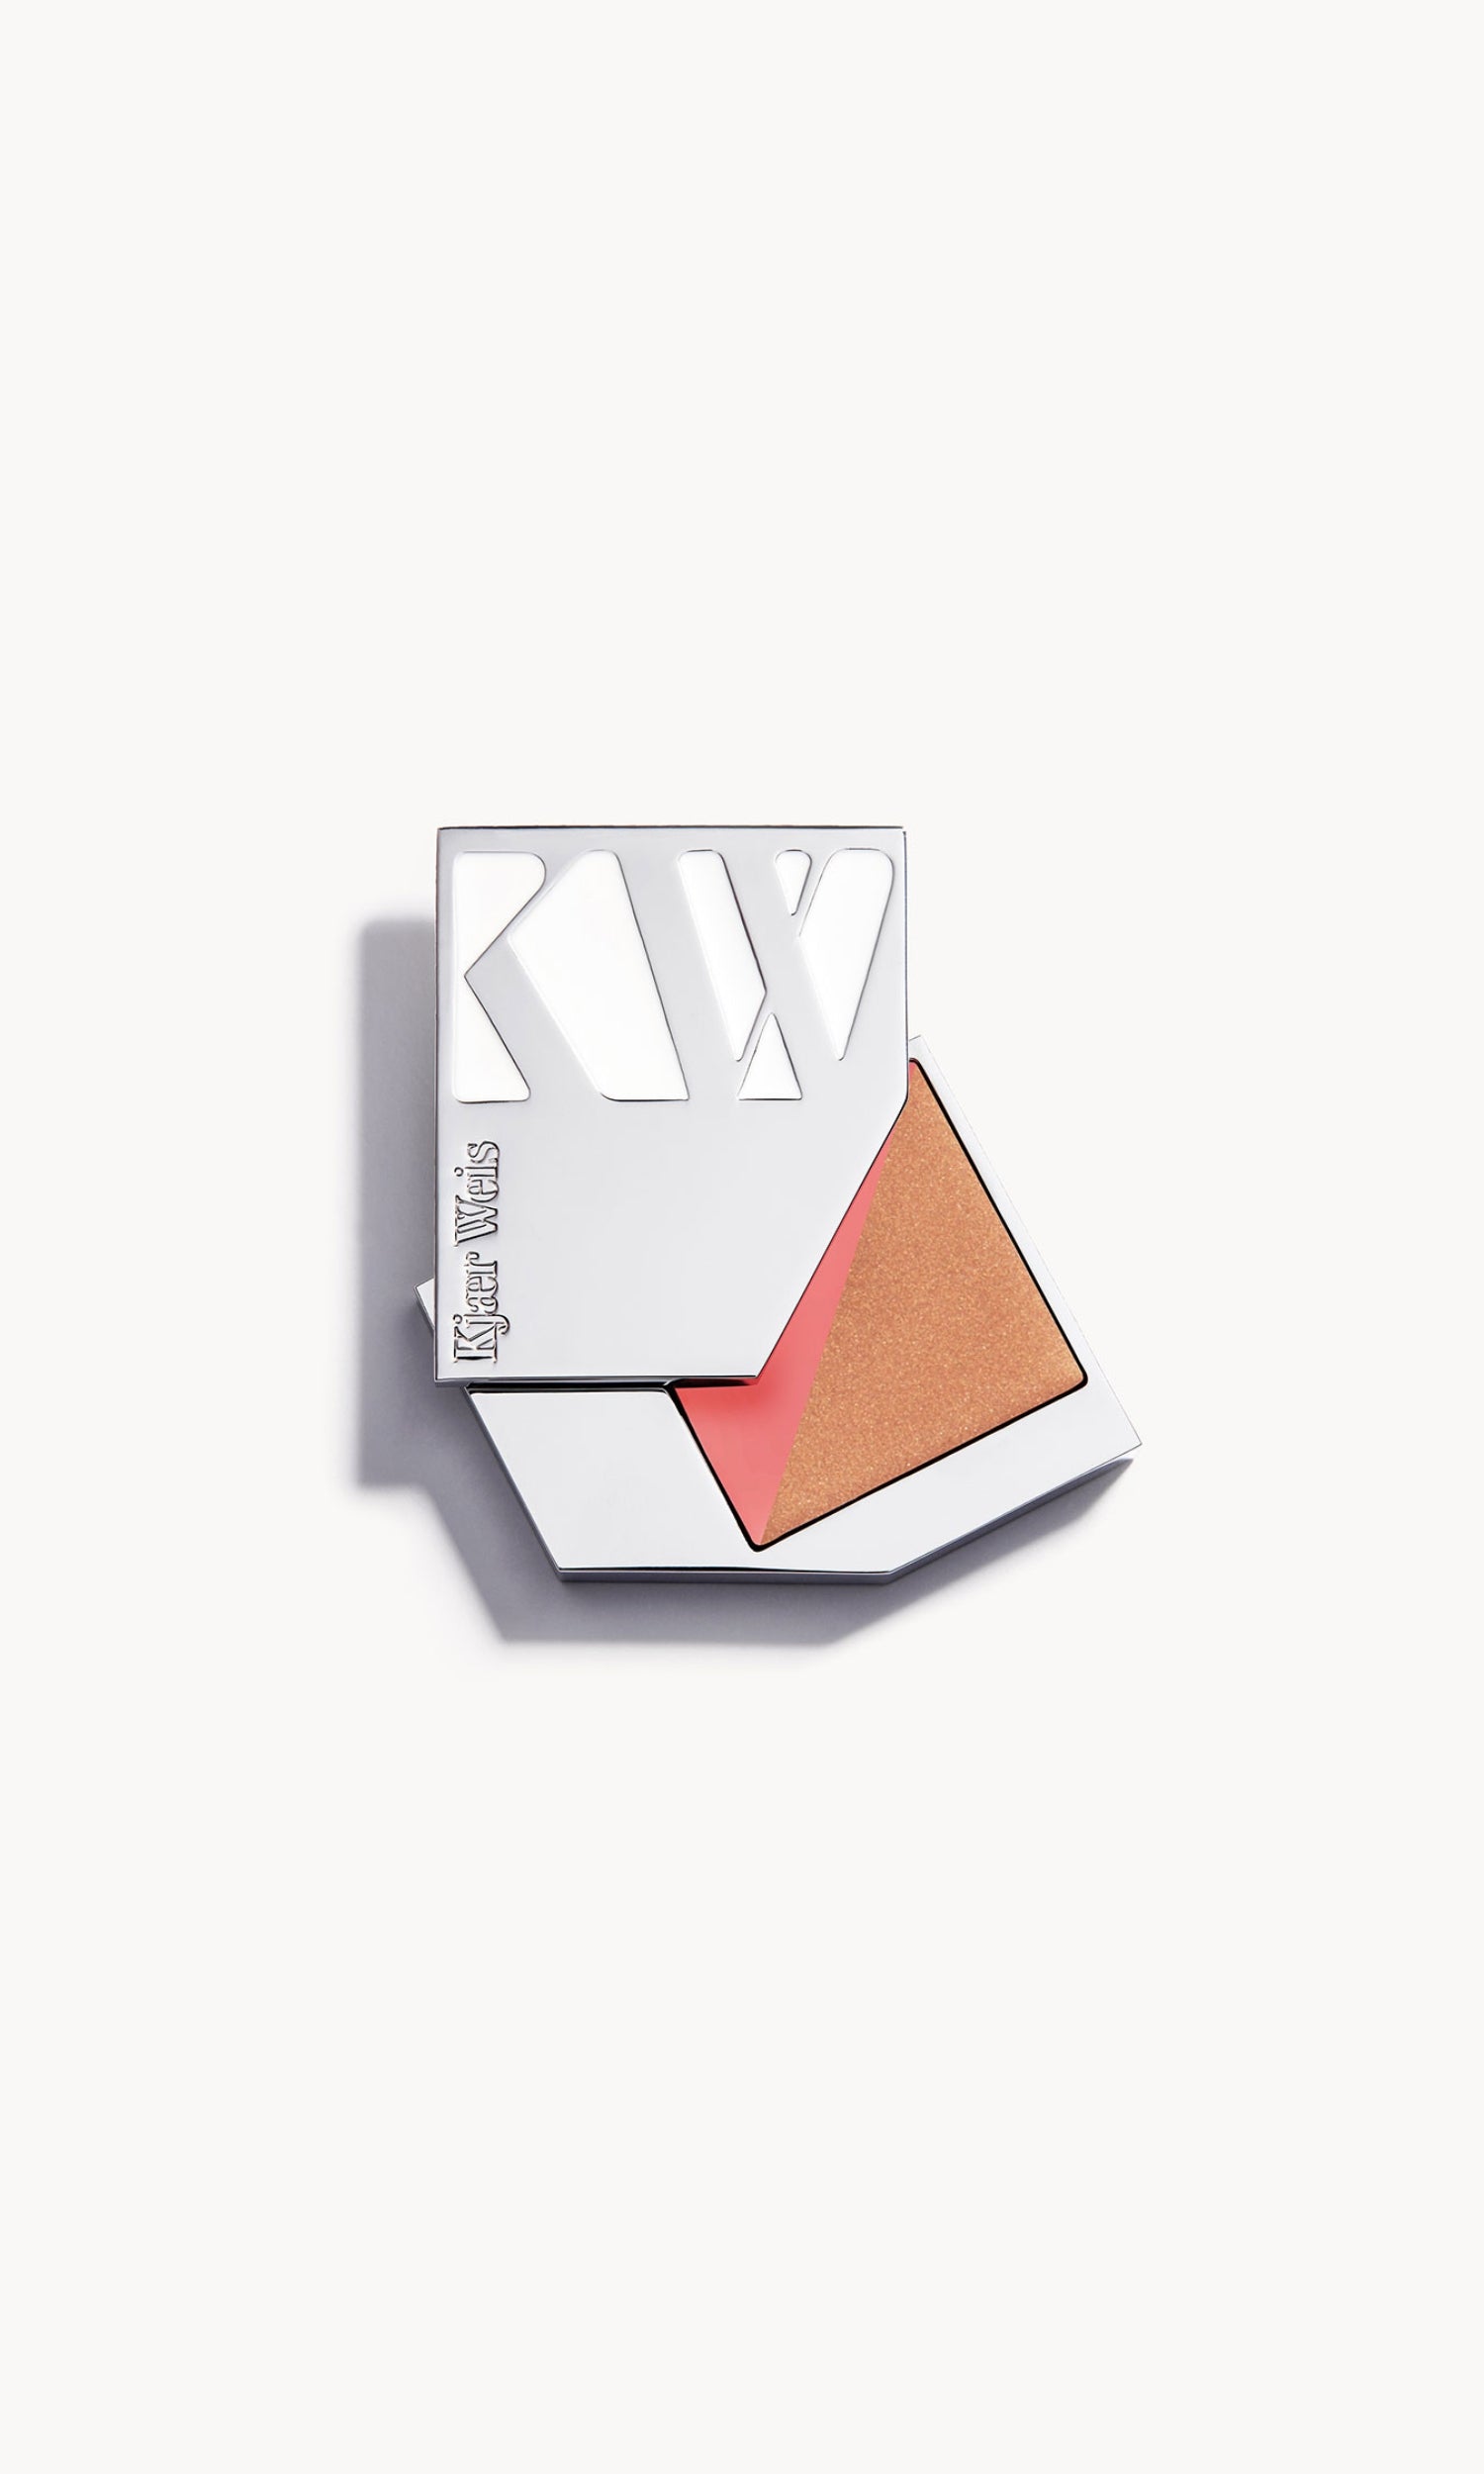 silver metal kw palette open to show a rectangle palette split diagonally in half, with a sheer bronzer on one side and a pink cream blush on the other